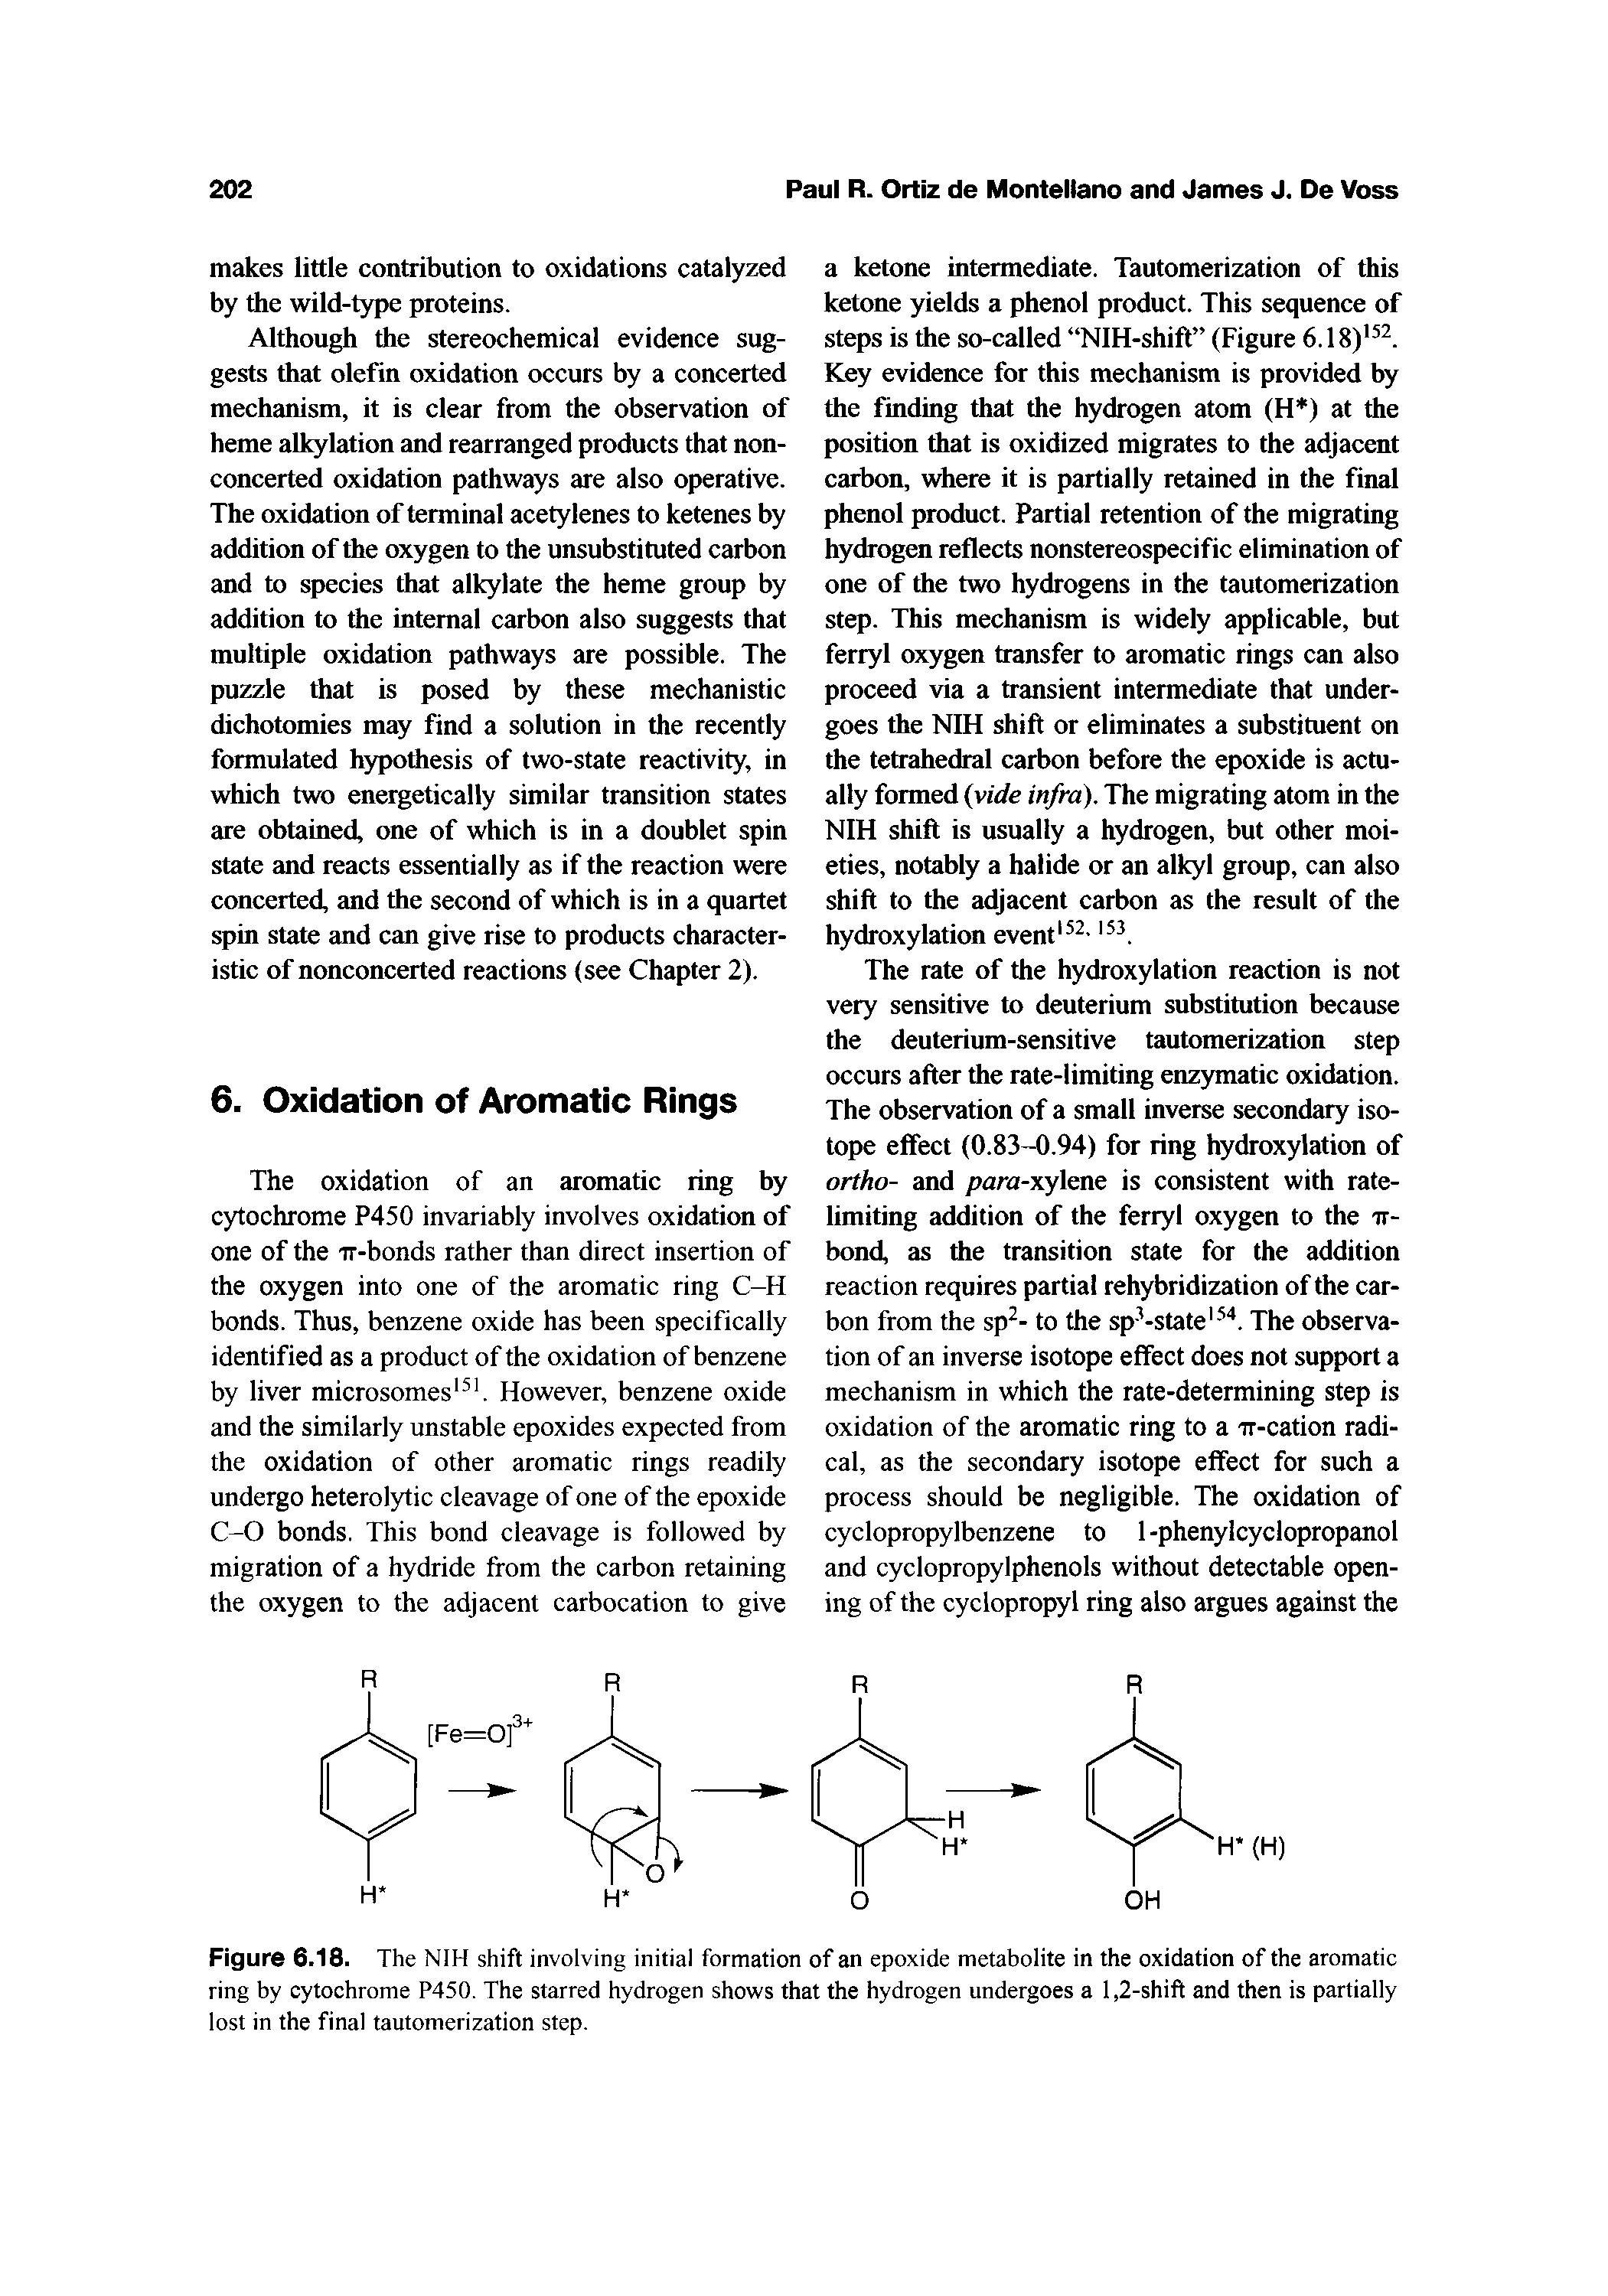 Figure 6.18. The NIH shift involving initial formation of an epoxide metabolite in the oxidation of the aromatic ring by cytochrome P450. The starred hydrogen shows that the hydrogen undergoes a 1,2-shift and then is partially lost in the final tautomerization step.